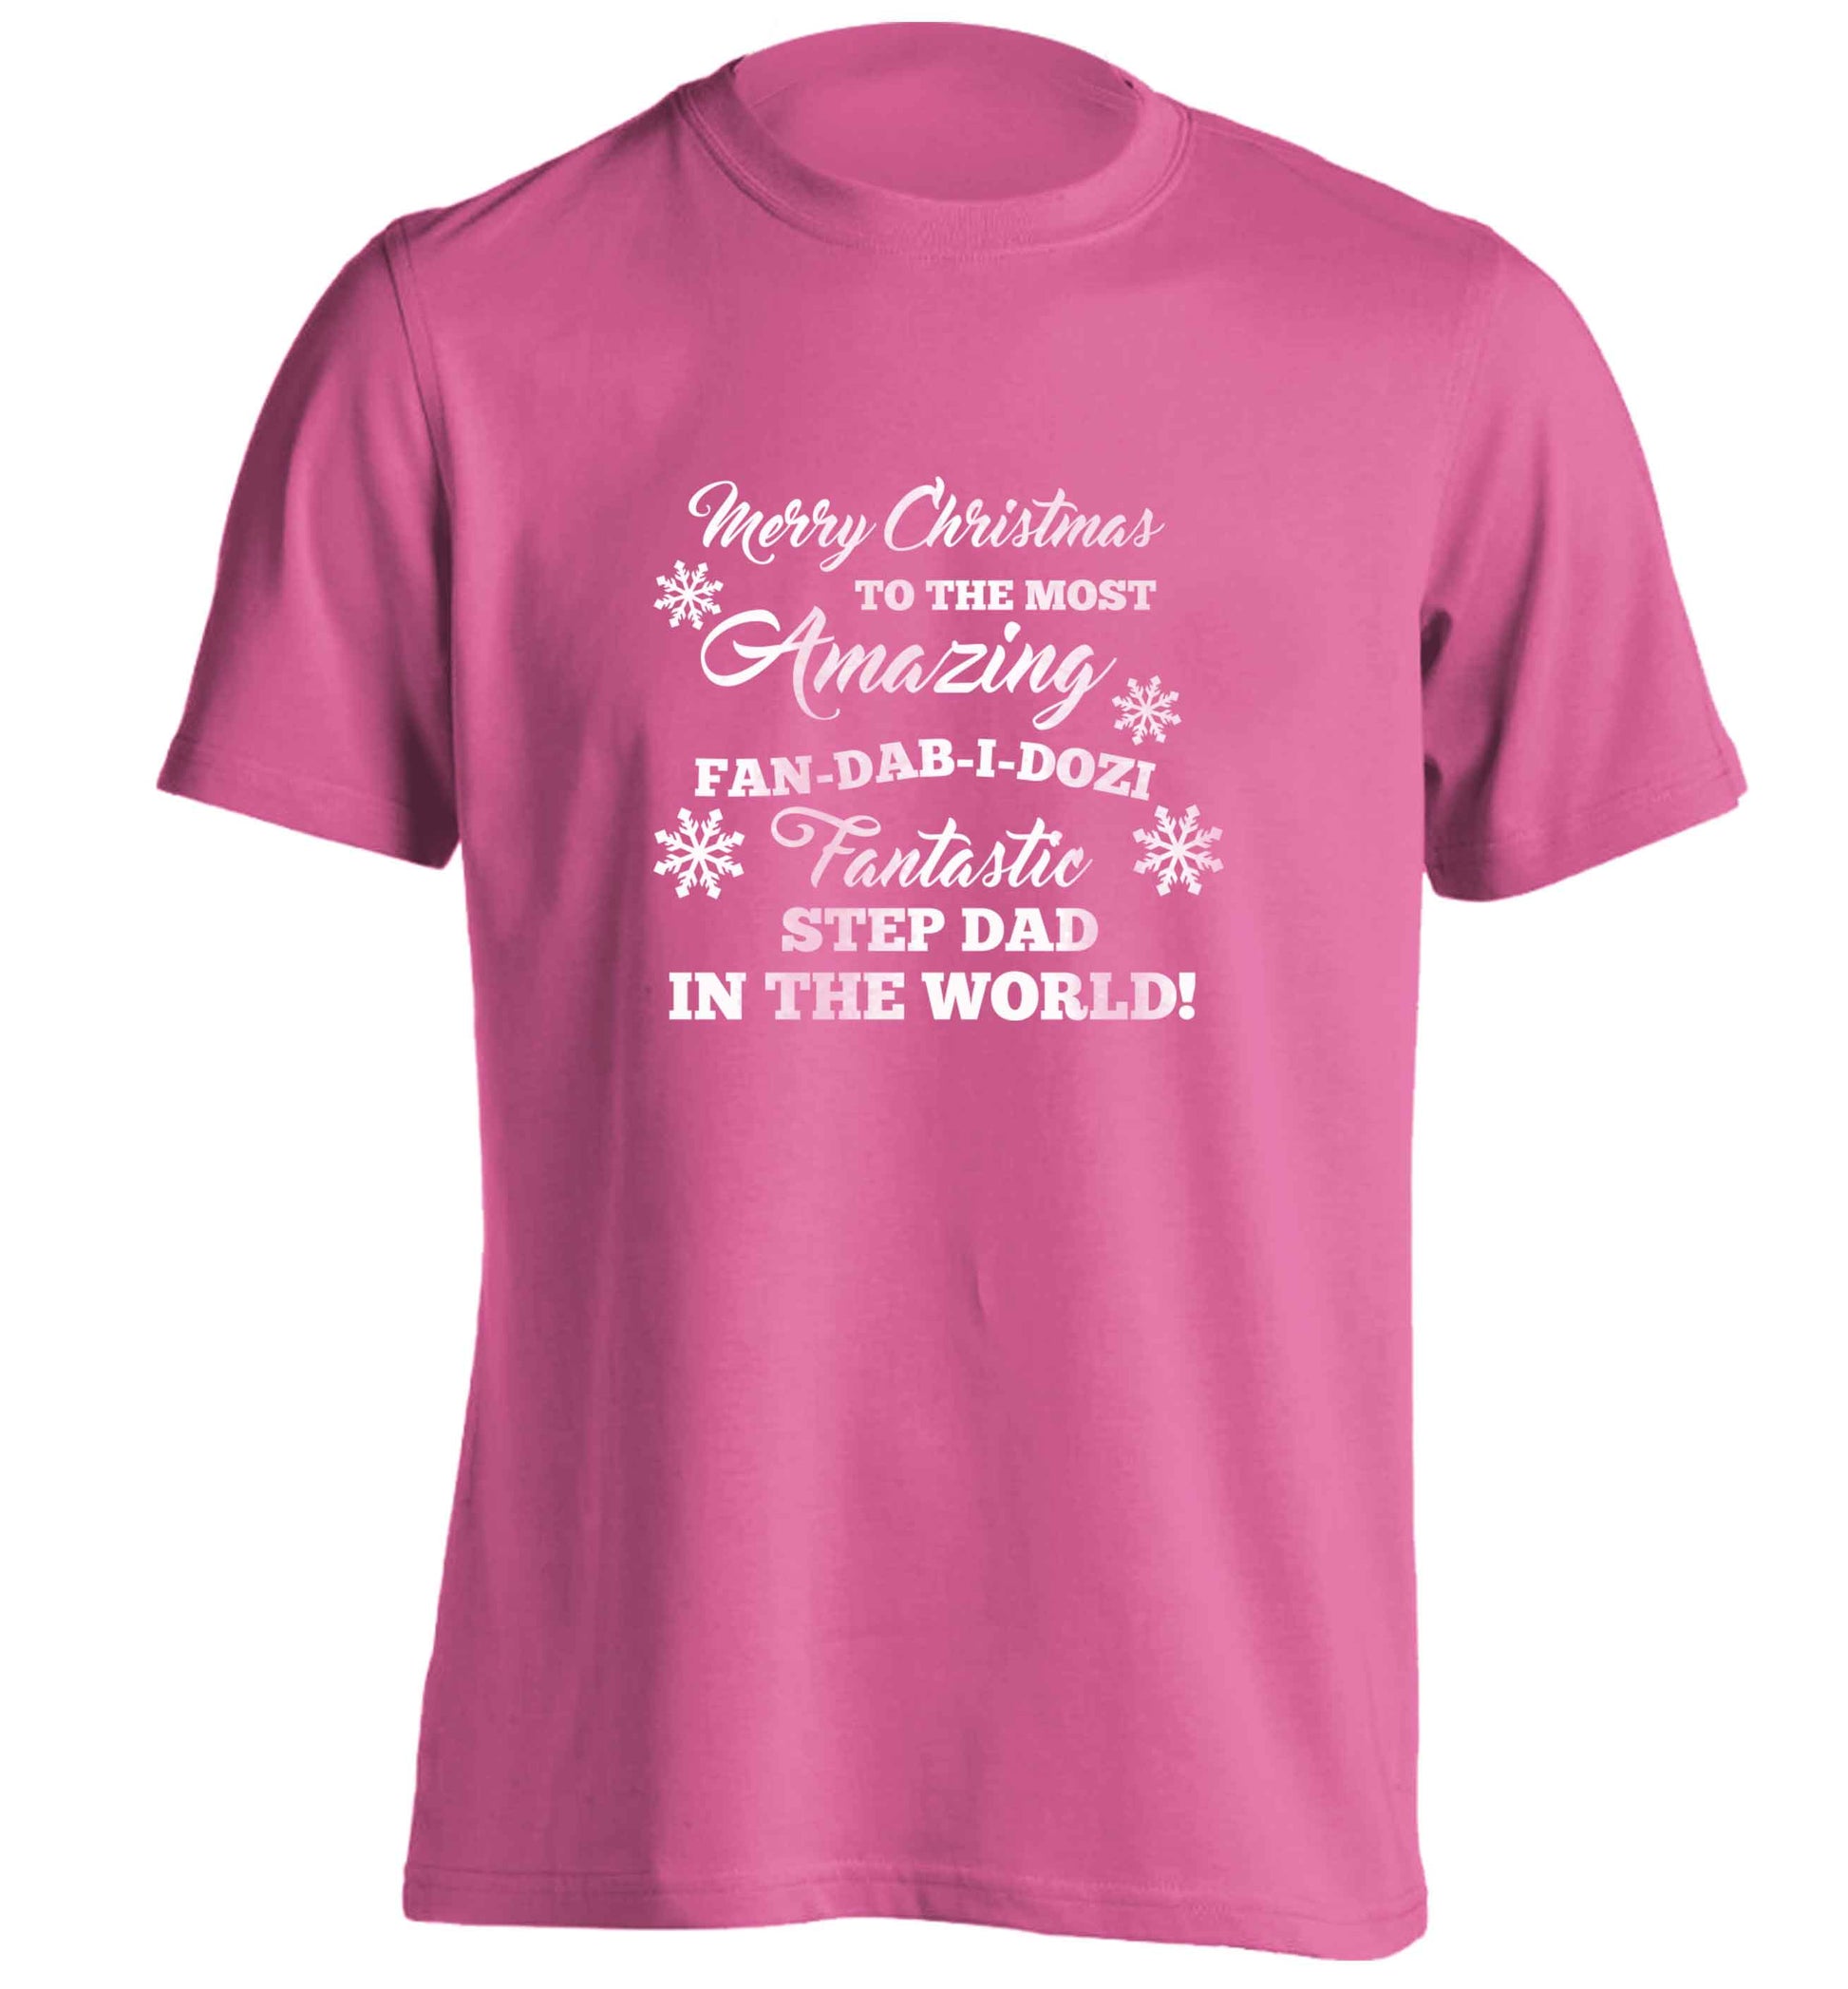 Merry Christmas to the most amazing fan-dab-i-dozi fantasic Step Dad in the world adults unisex pink Tshirt 2XL